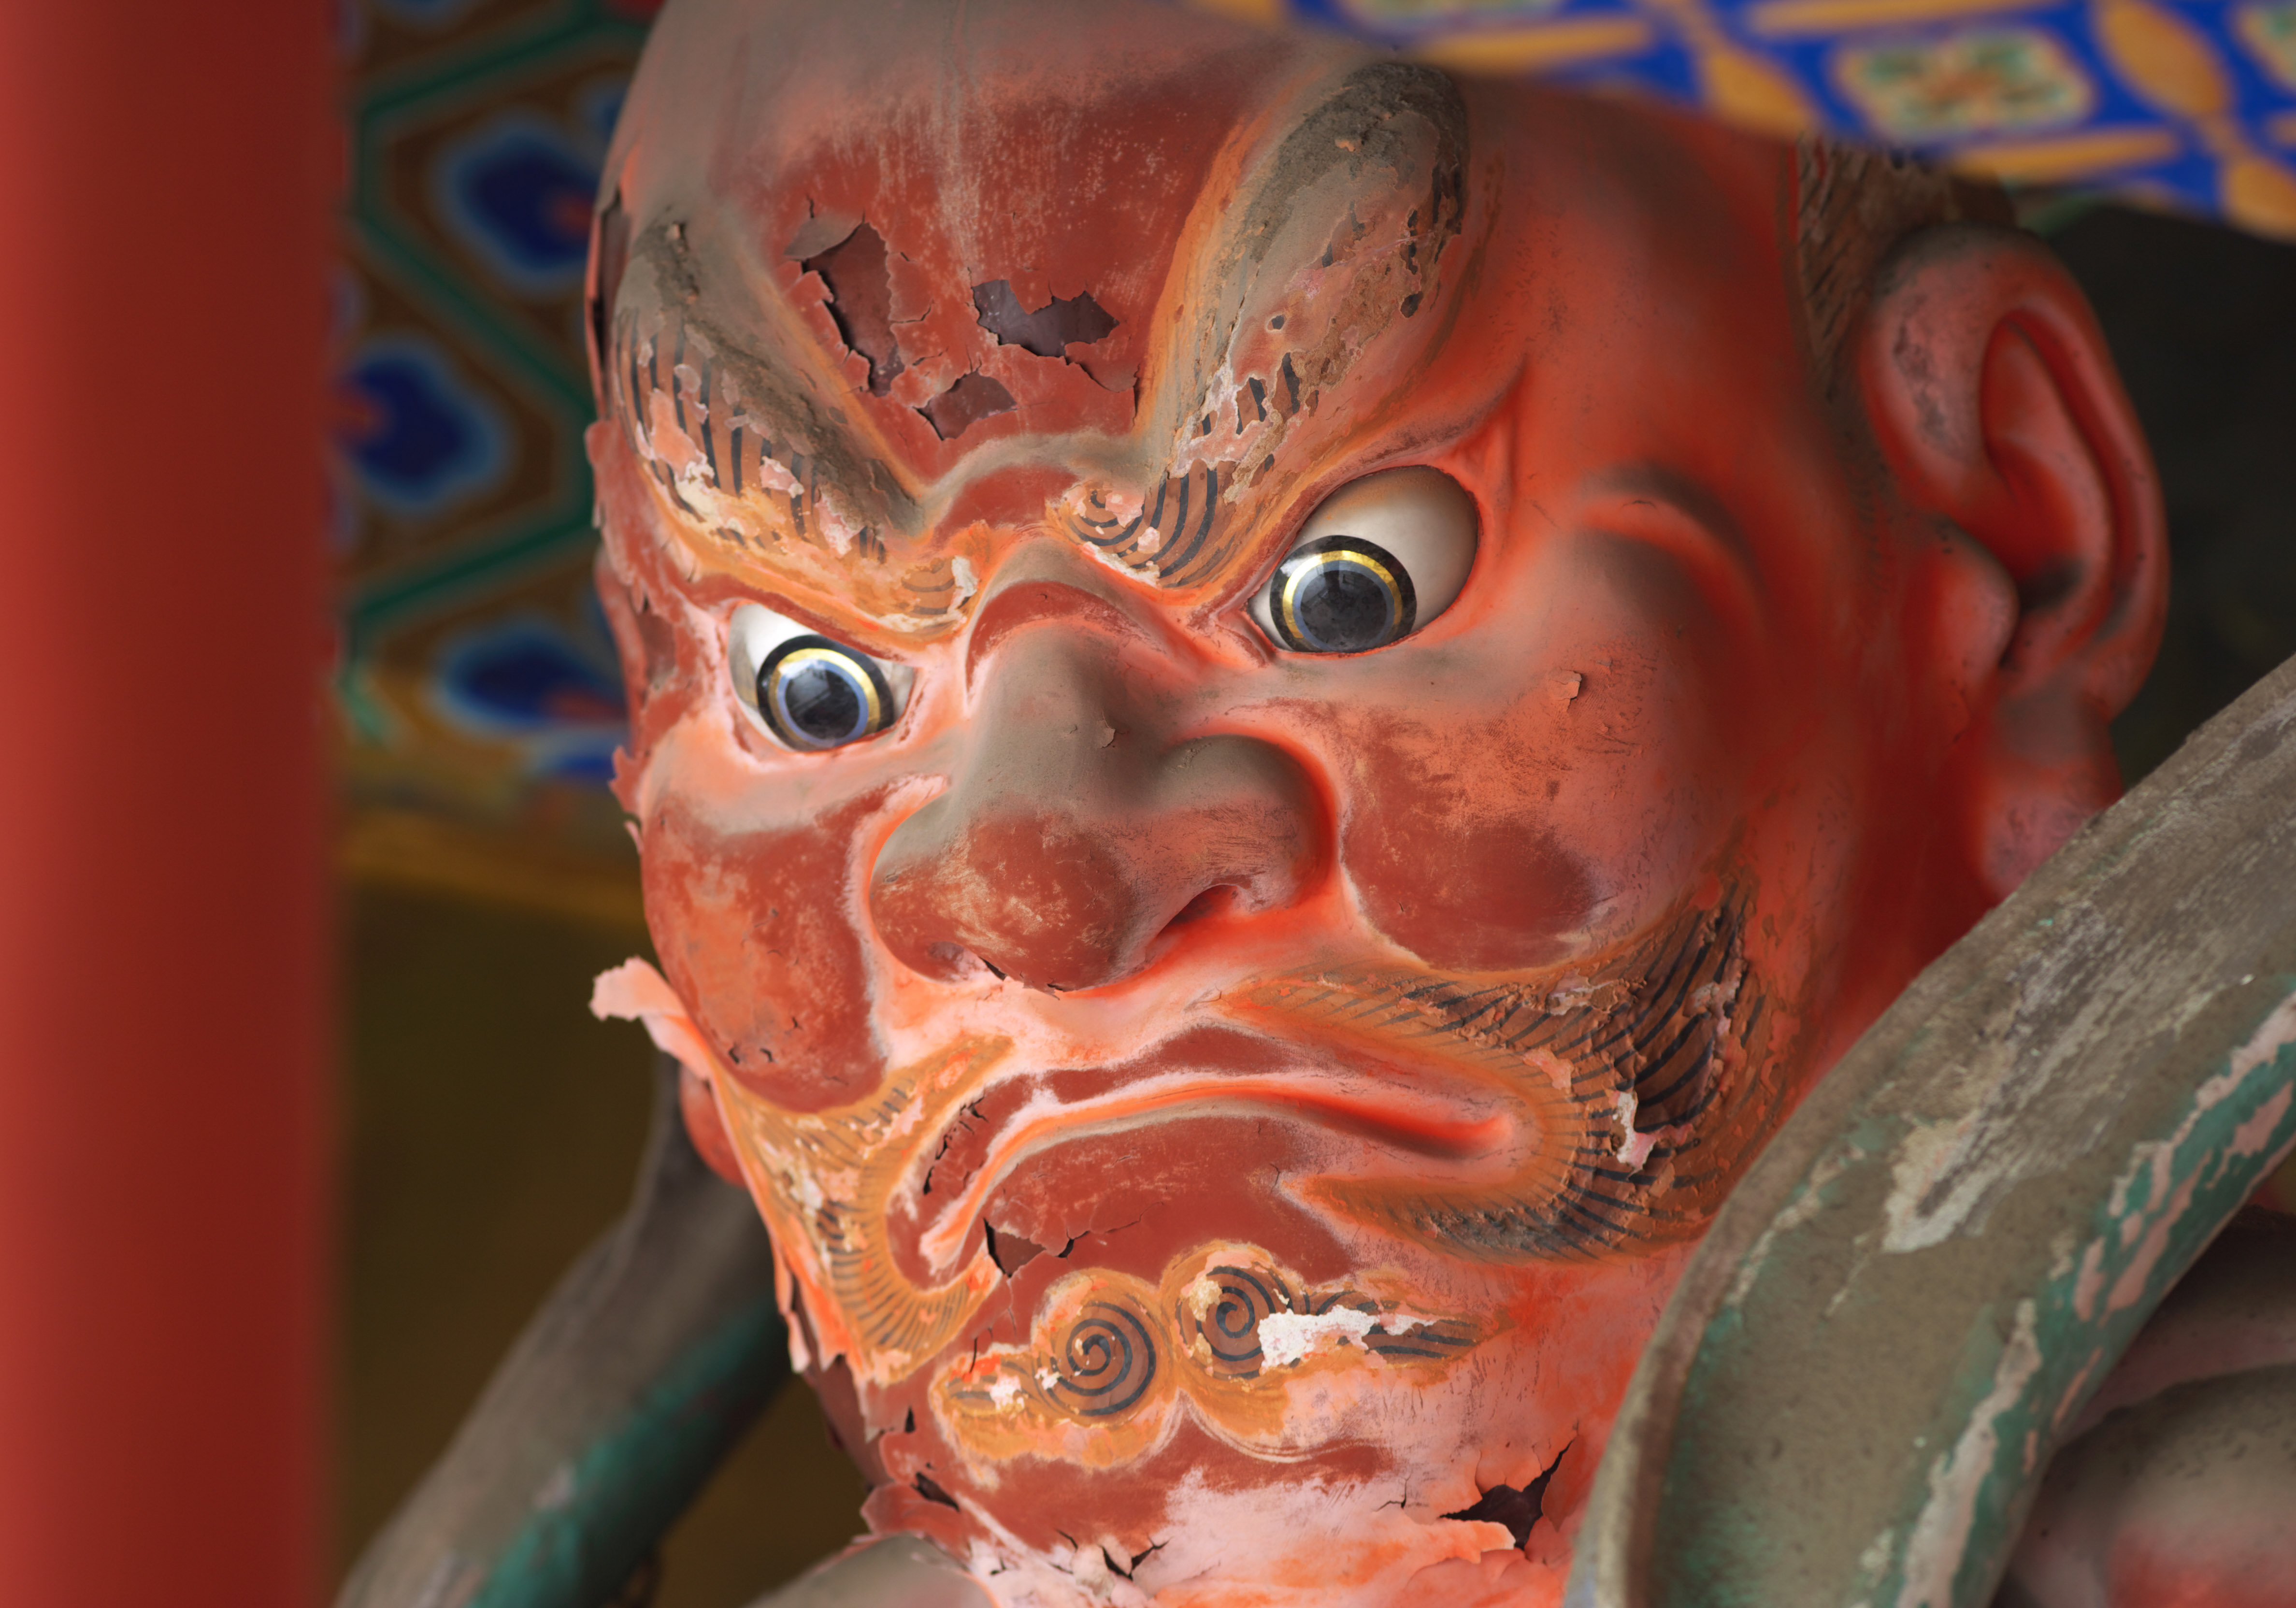 photo,material,free,landscape,picture,stock photo,Creative Commons,Two Deva kings image of Tosho-gu Shrine, Two Deva kings, Red, face, 